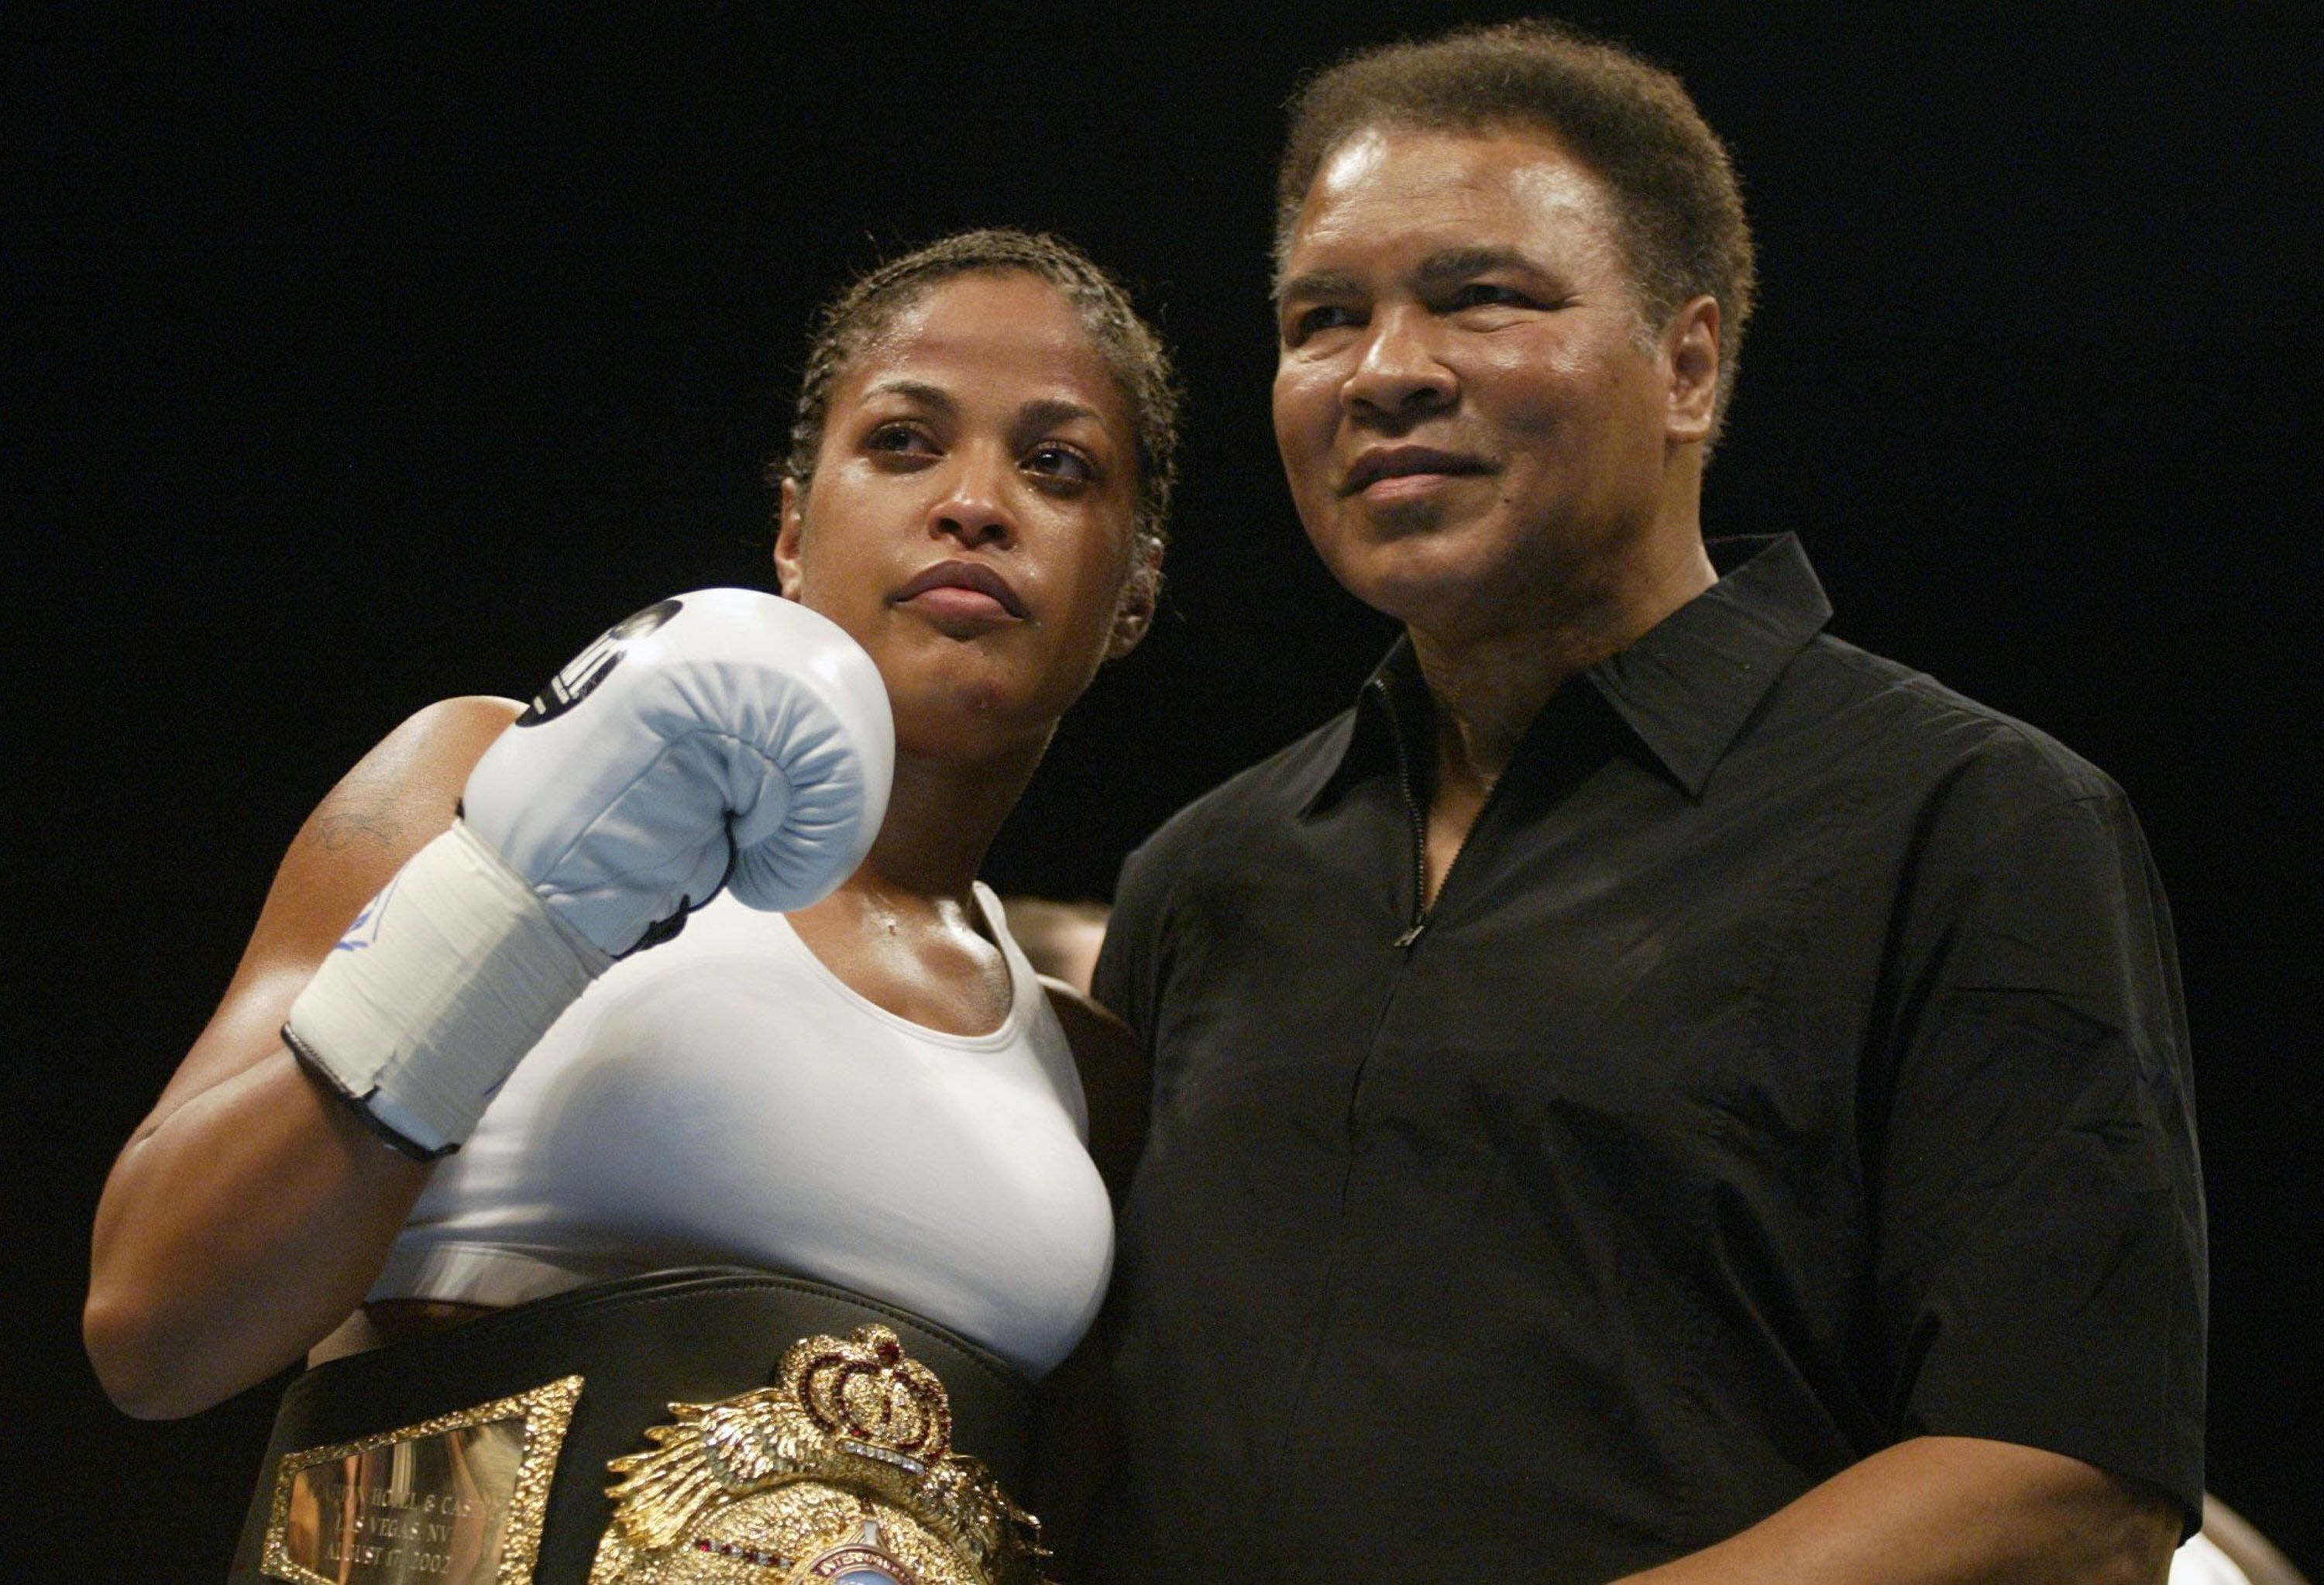 Laila Ali poses with her late father and former boxer, Muhammad Ali, after defeating Suzy Taylor at the Aladdin Casino on August 17, 2002 in Las Vegas, Nevada | Photo: Getty Images